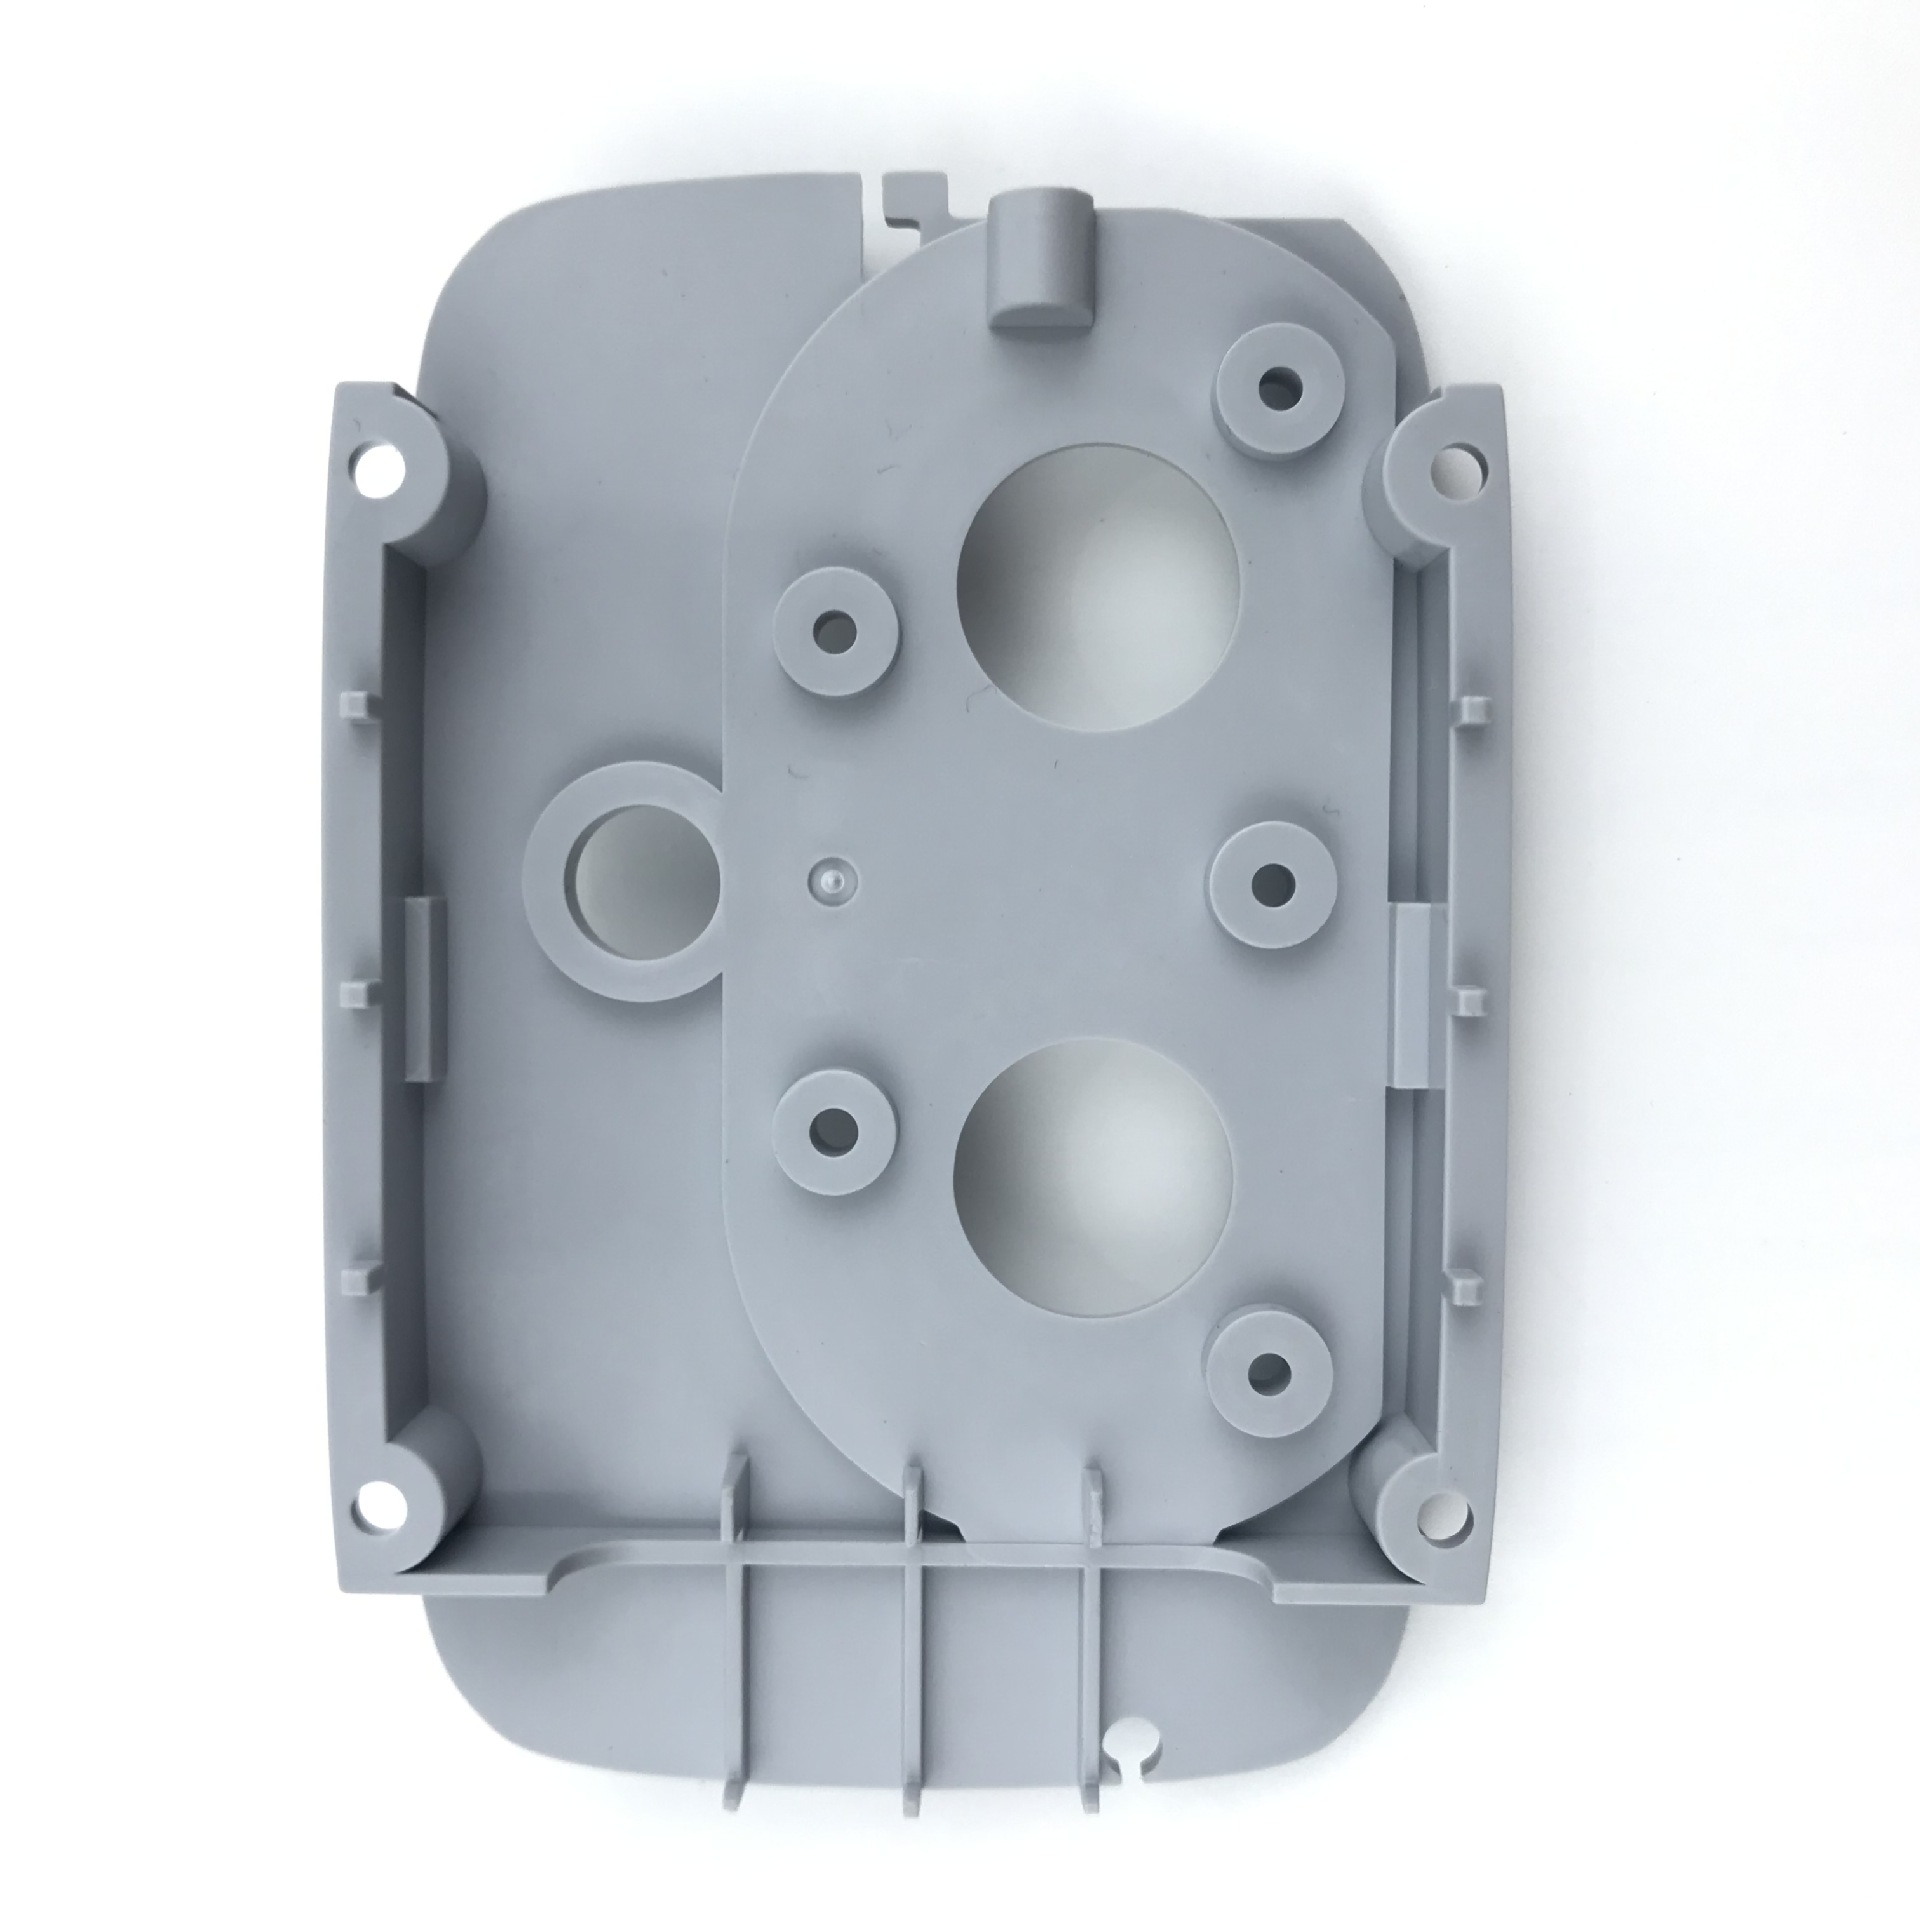 abs infrared medical housing plastic products manufacturers/custom plastic housing molds